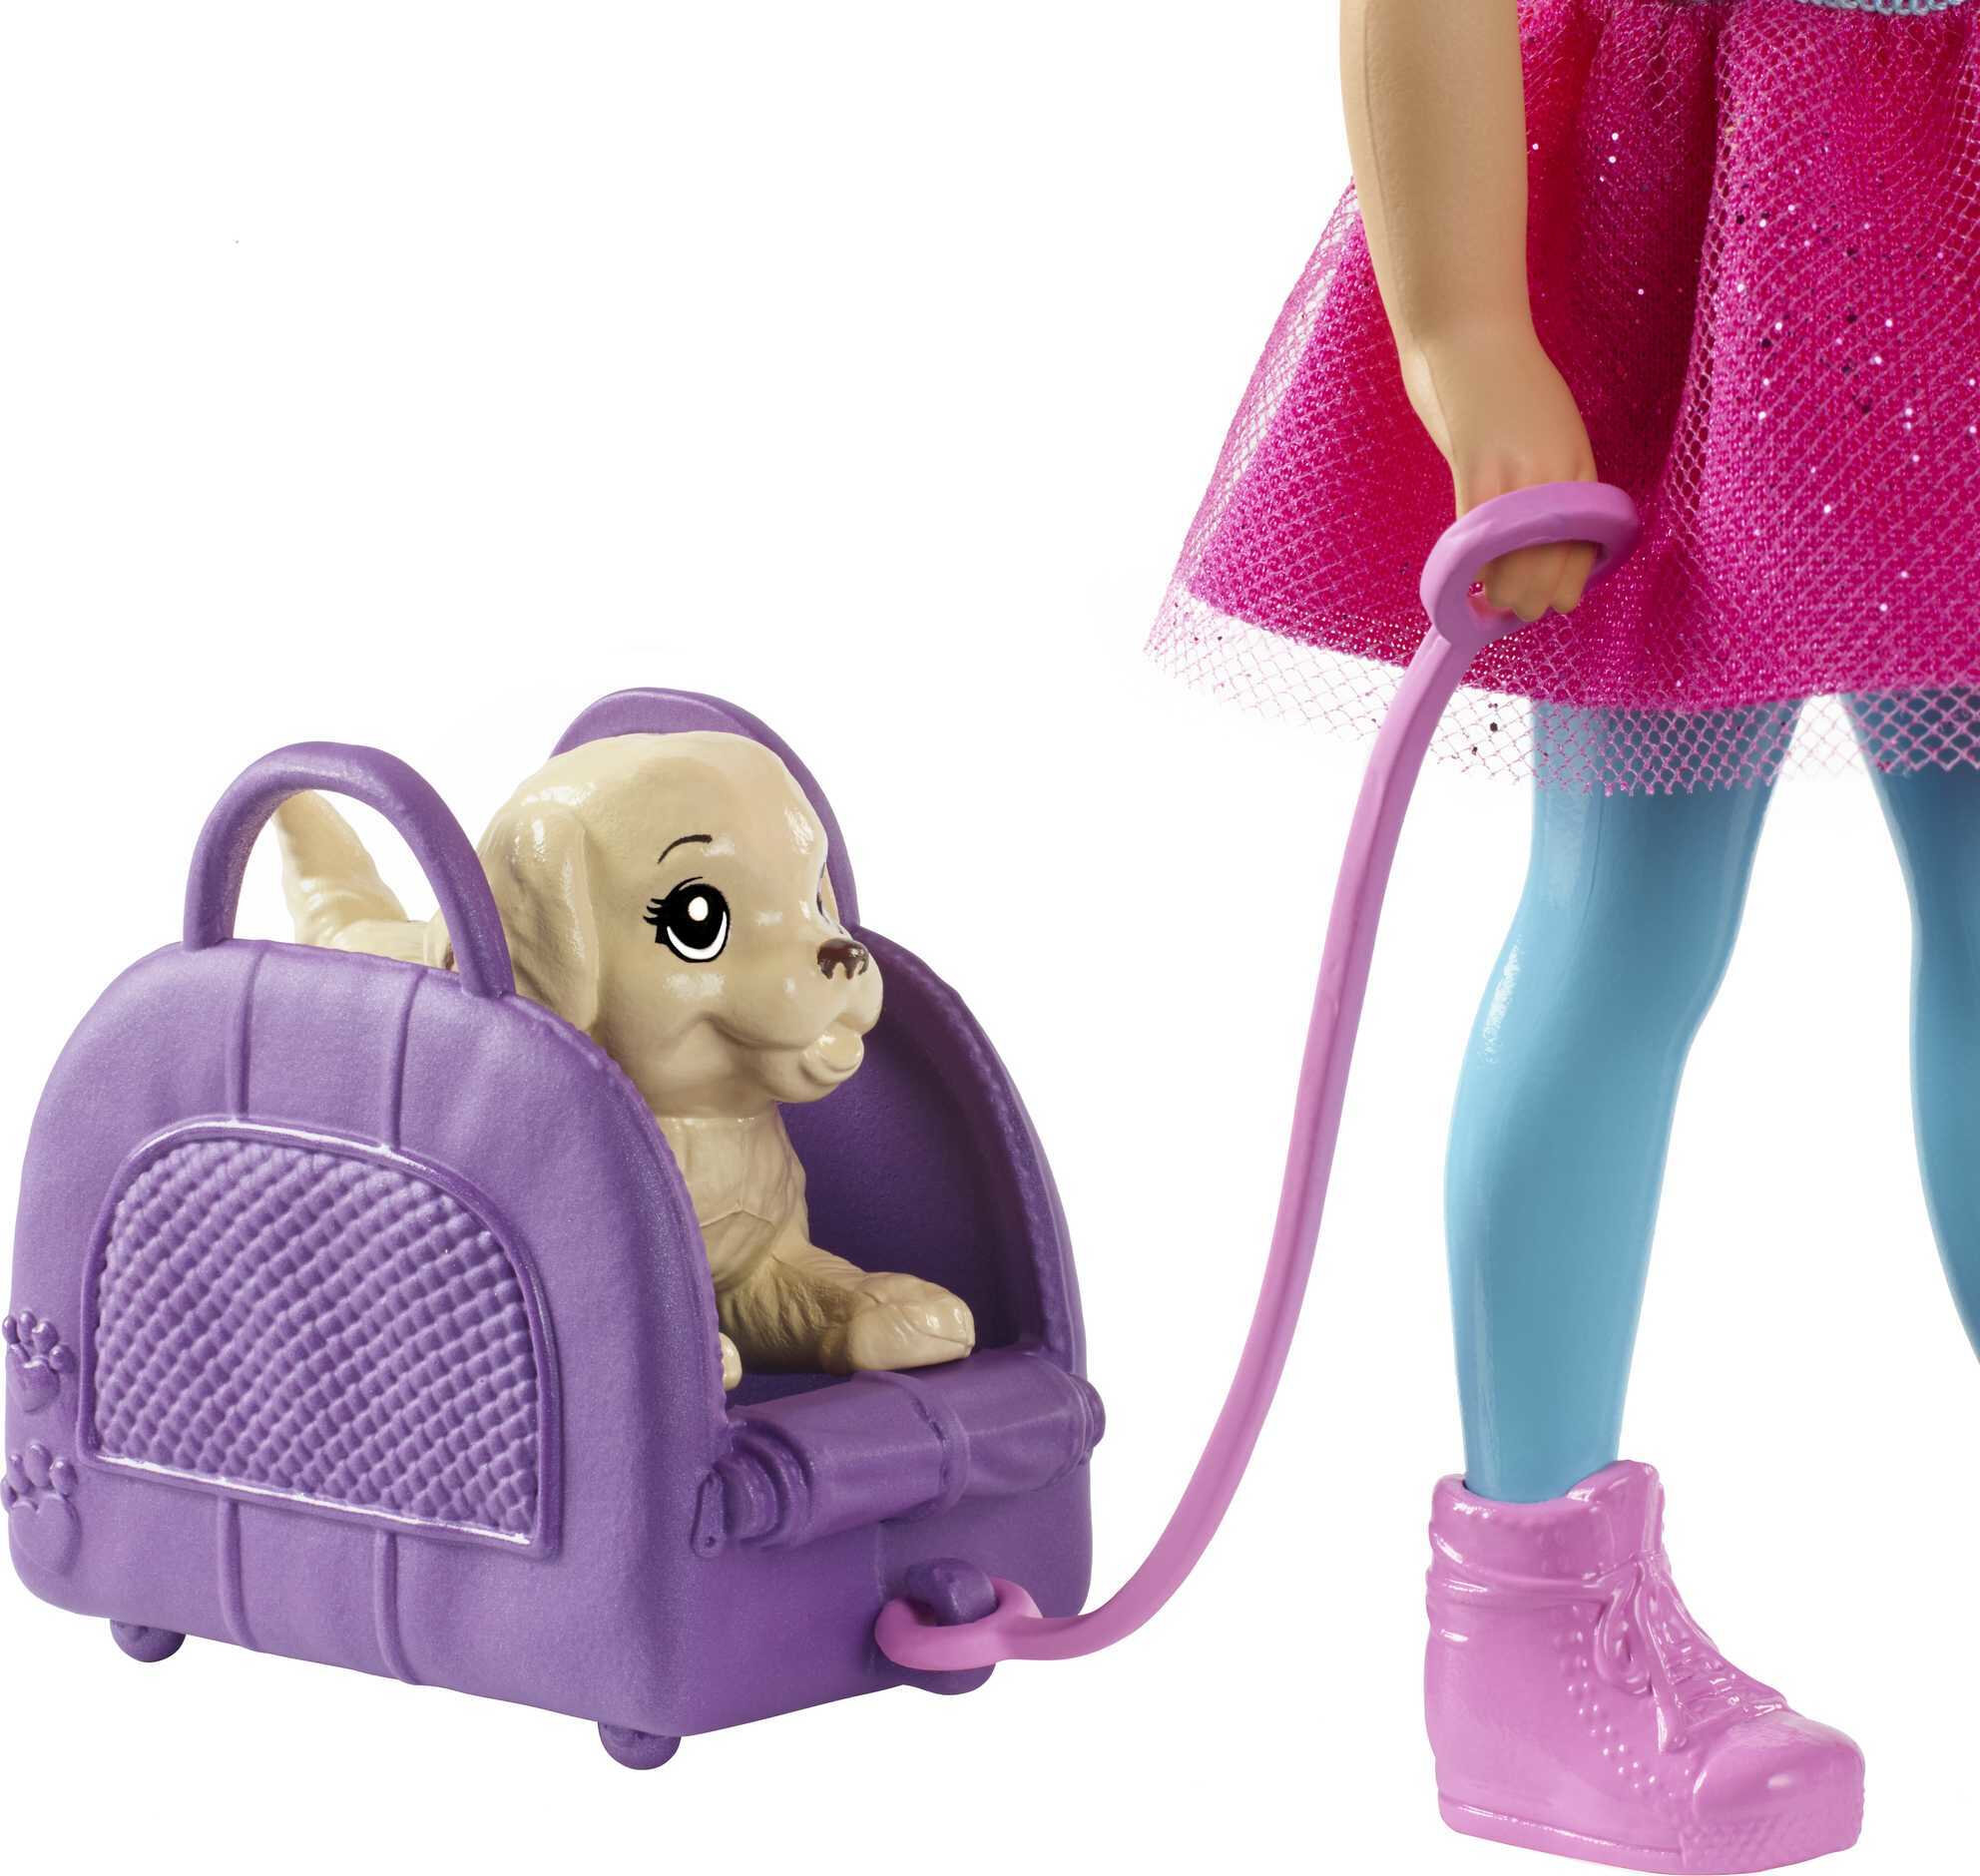 Barbie Dreamhouse Adventures Chelsea Doll & Accessories, Travel Set with Puppy, Blonde Small Doll - image 3 of 6